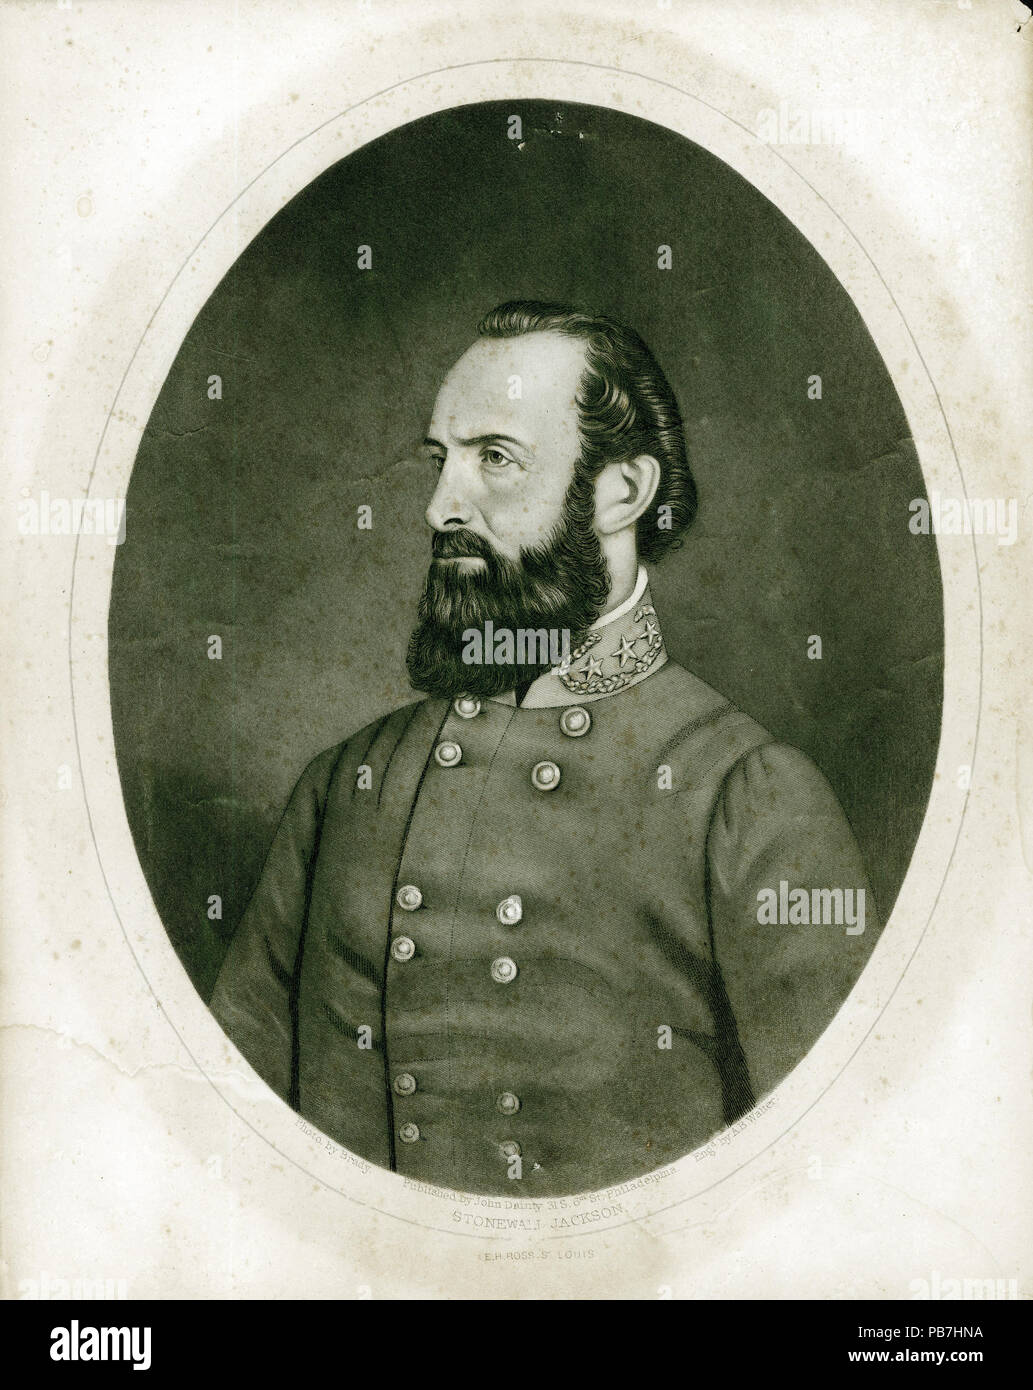 . English: Bust portrait of a man in uniform. 'STONEWALL JACKSON' (printed below image). Title: Stonewall Jackson, General (Confederate). between 1861 and 1865 1577 Stonewall Jackson, General (Confederate) Stock Photo